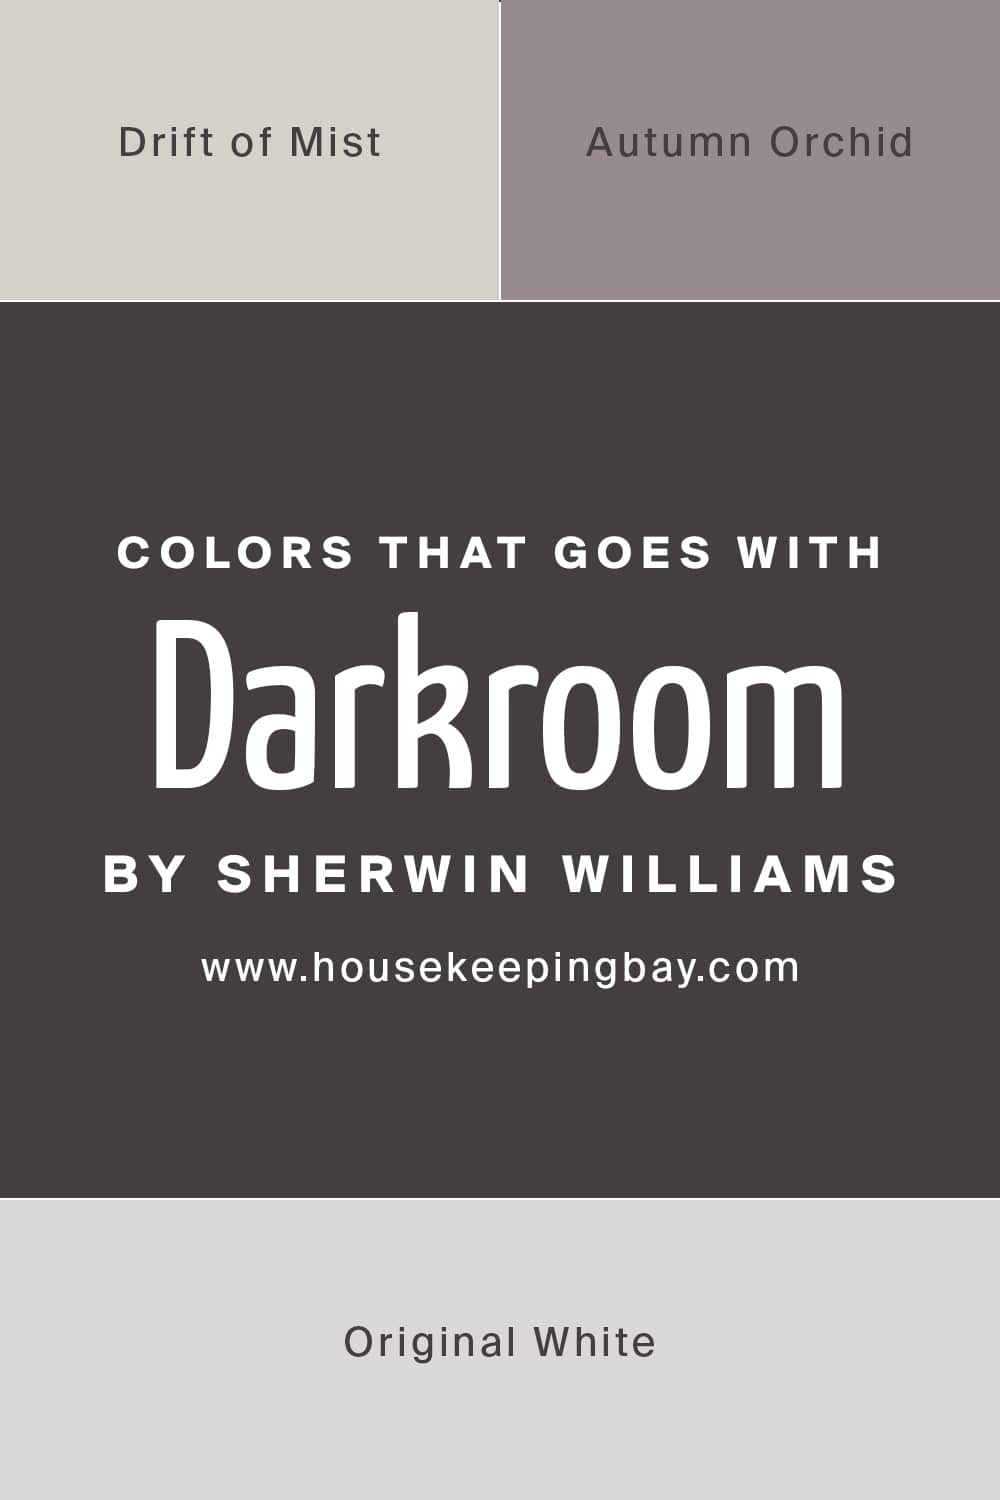 Colors that goes with Darkroom by Sherwin Williams